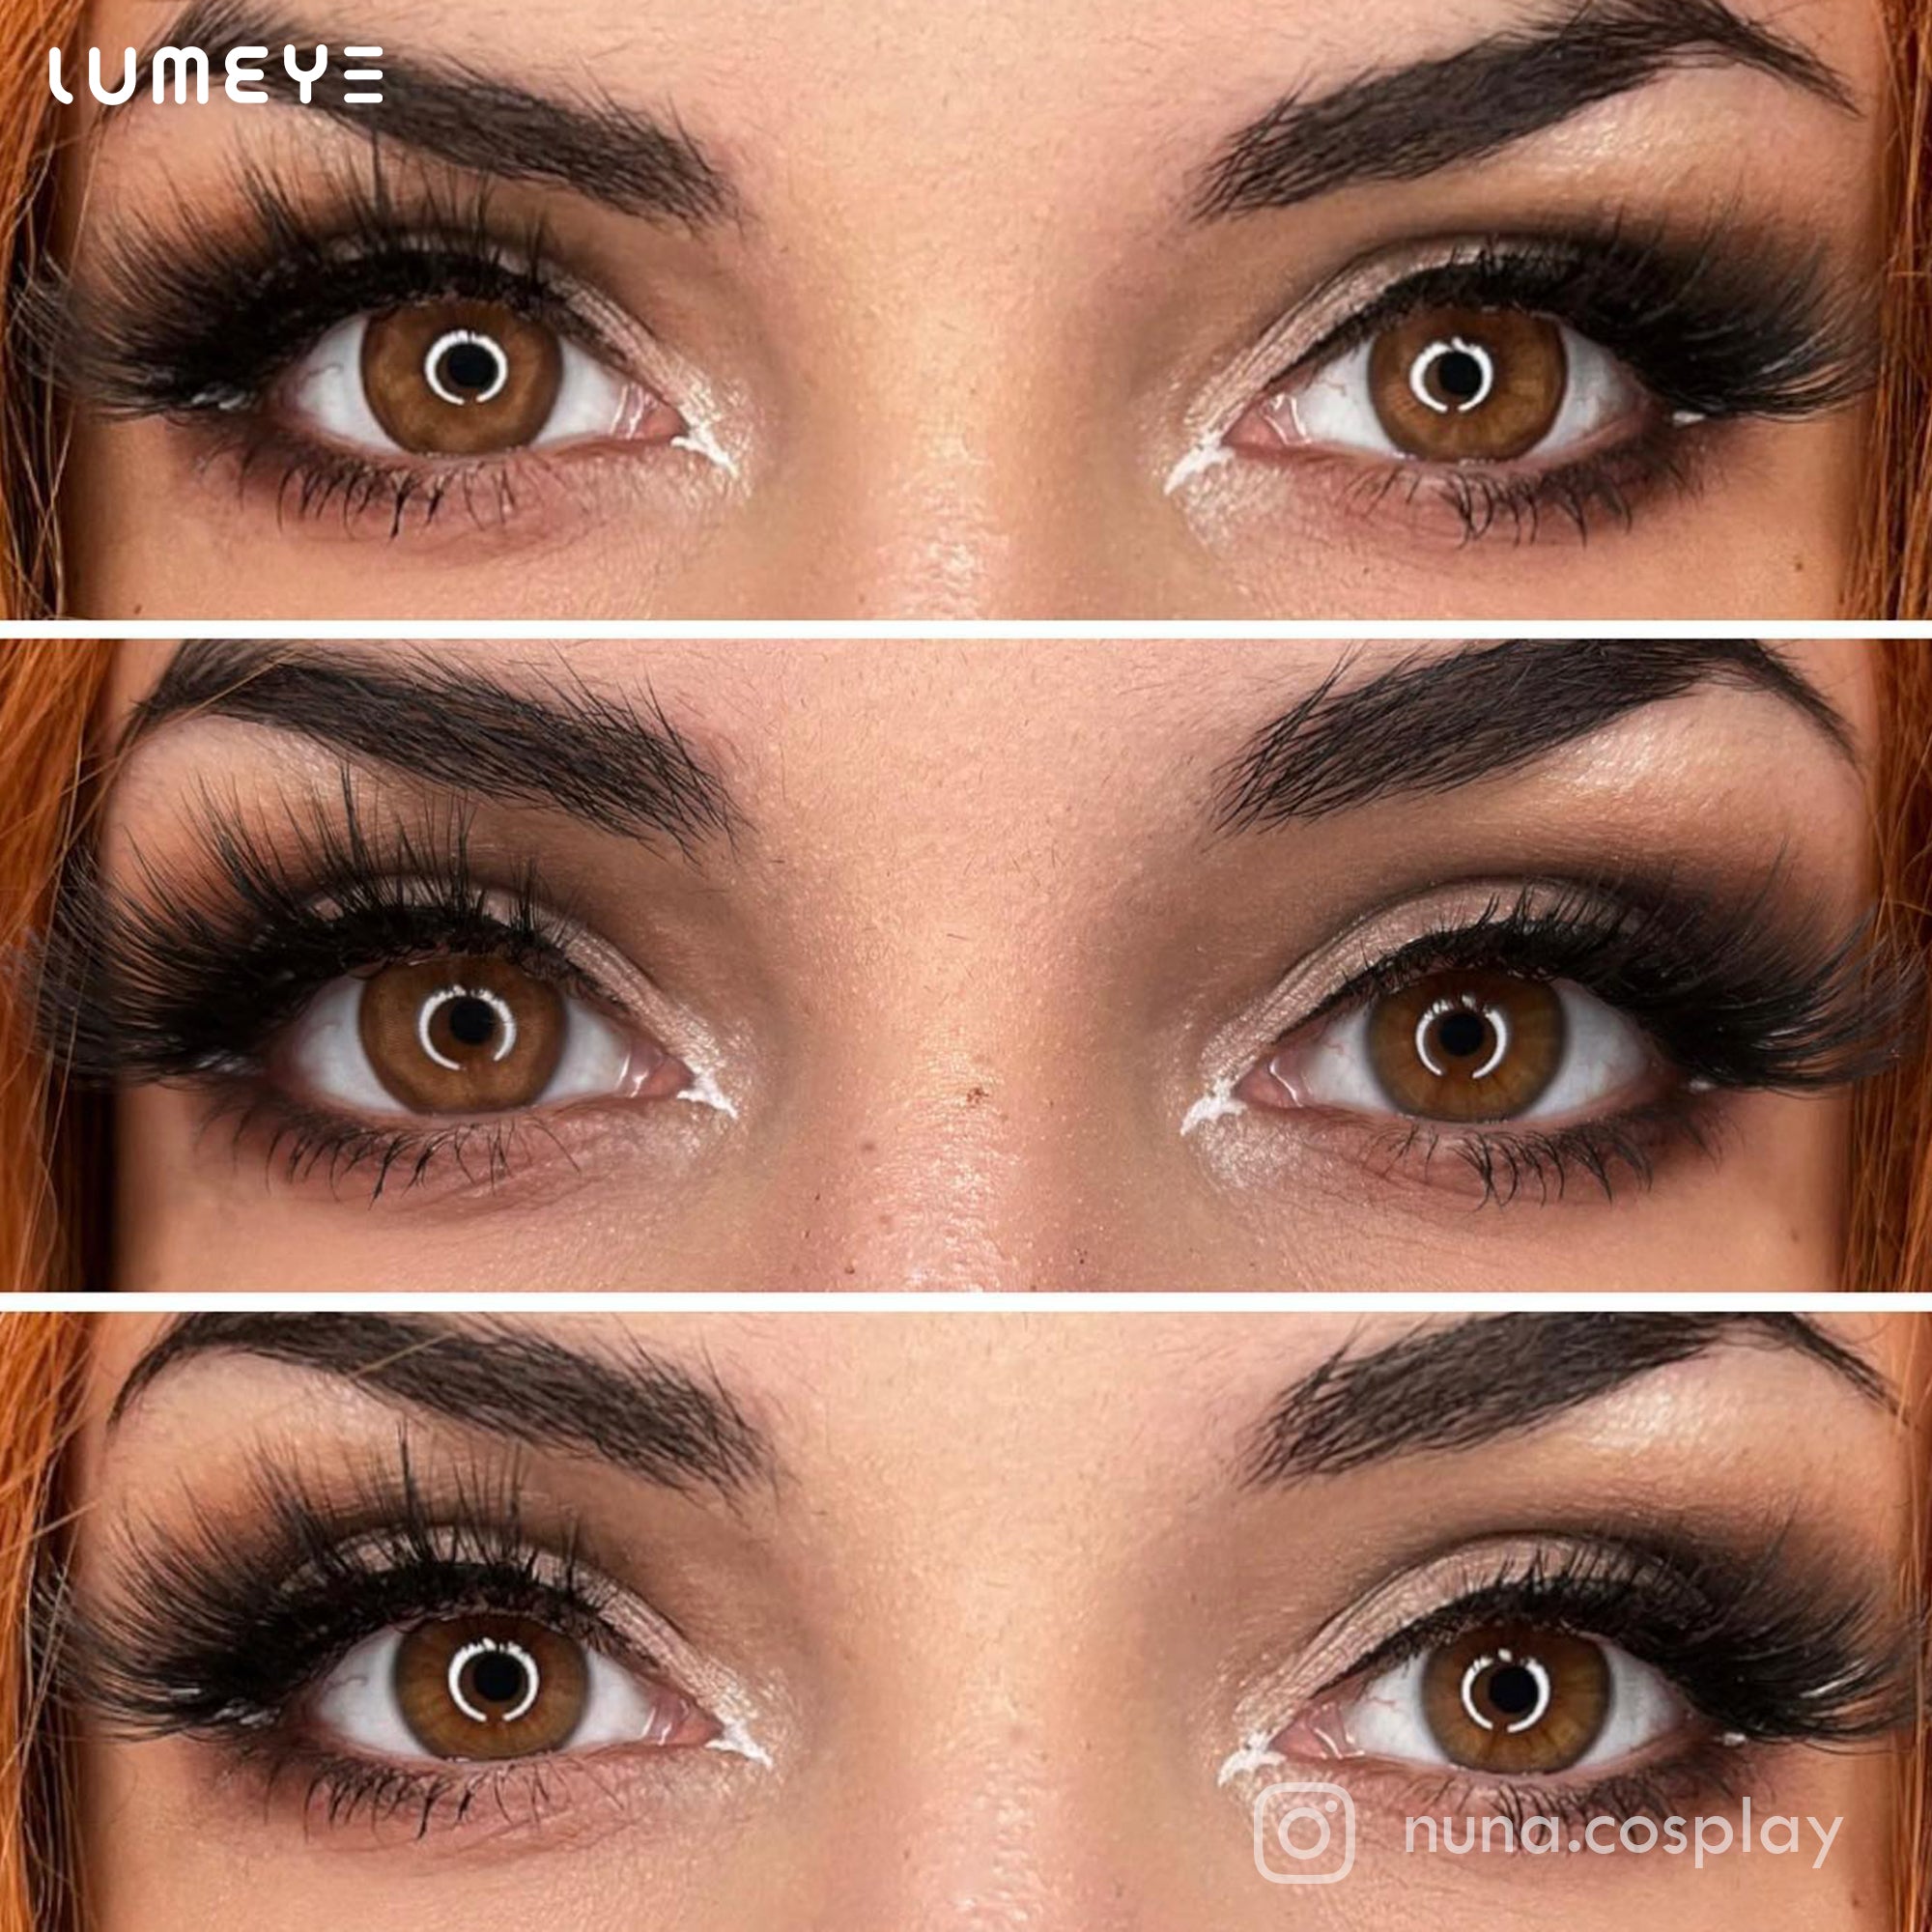 Best COLORED CONTACTS - LUMEYE Flowery Brown Colored Contact Lenses - LUMEYE